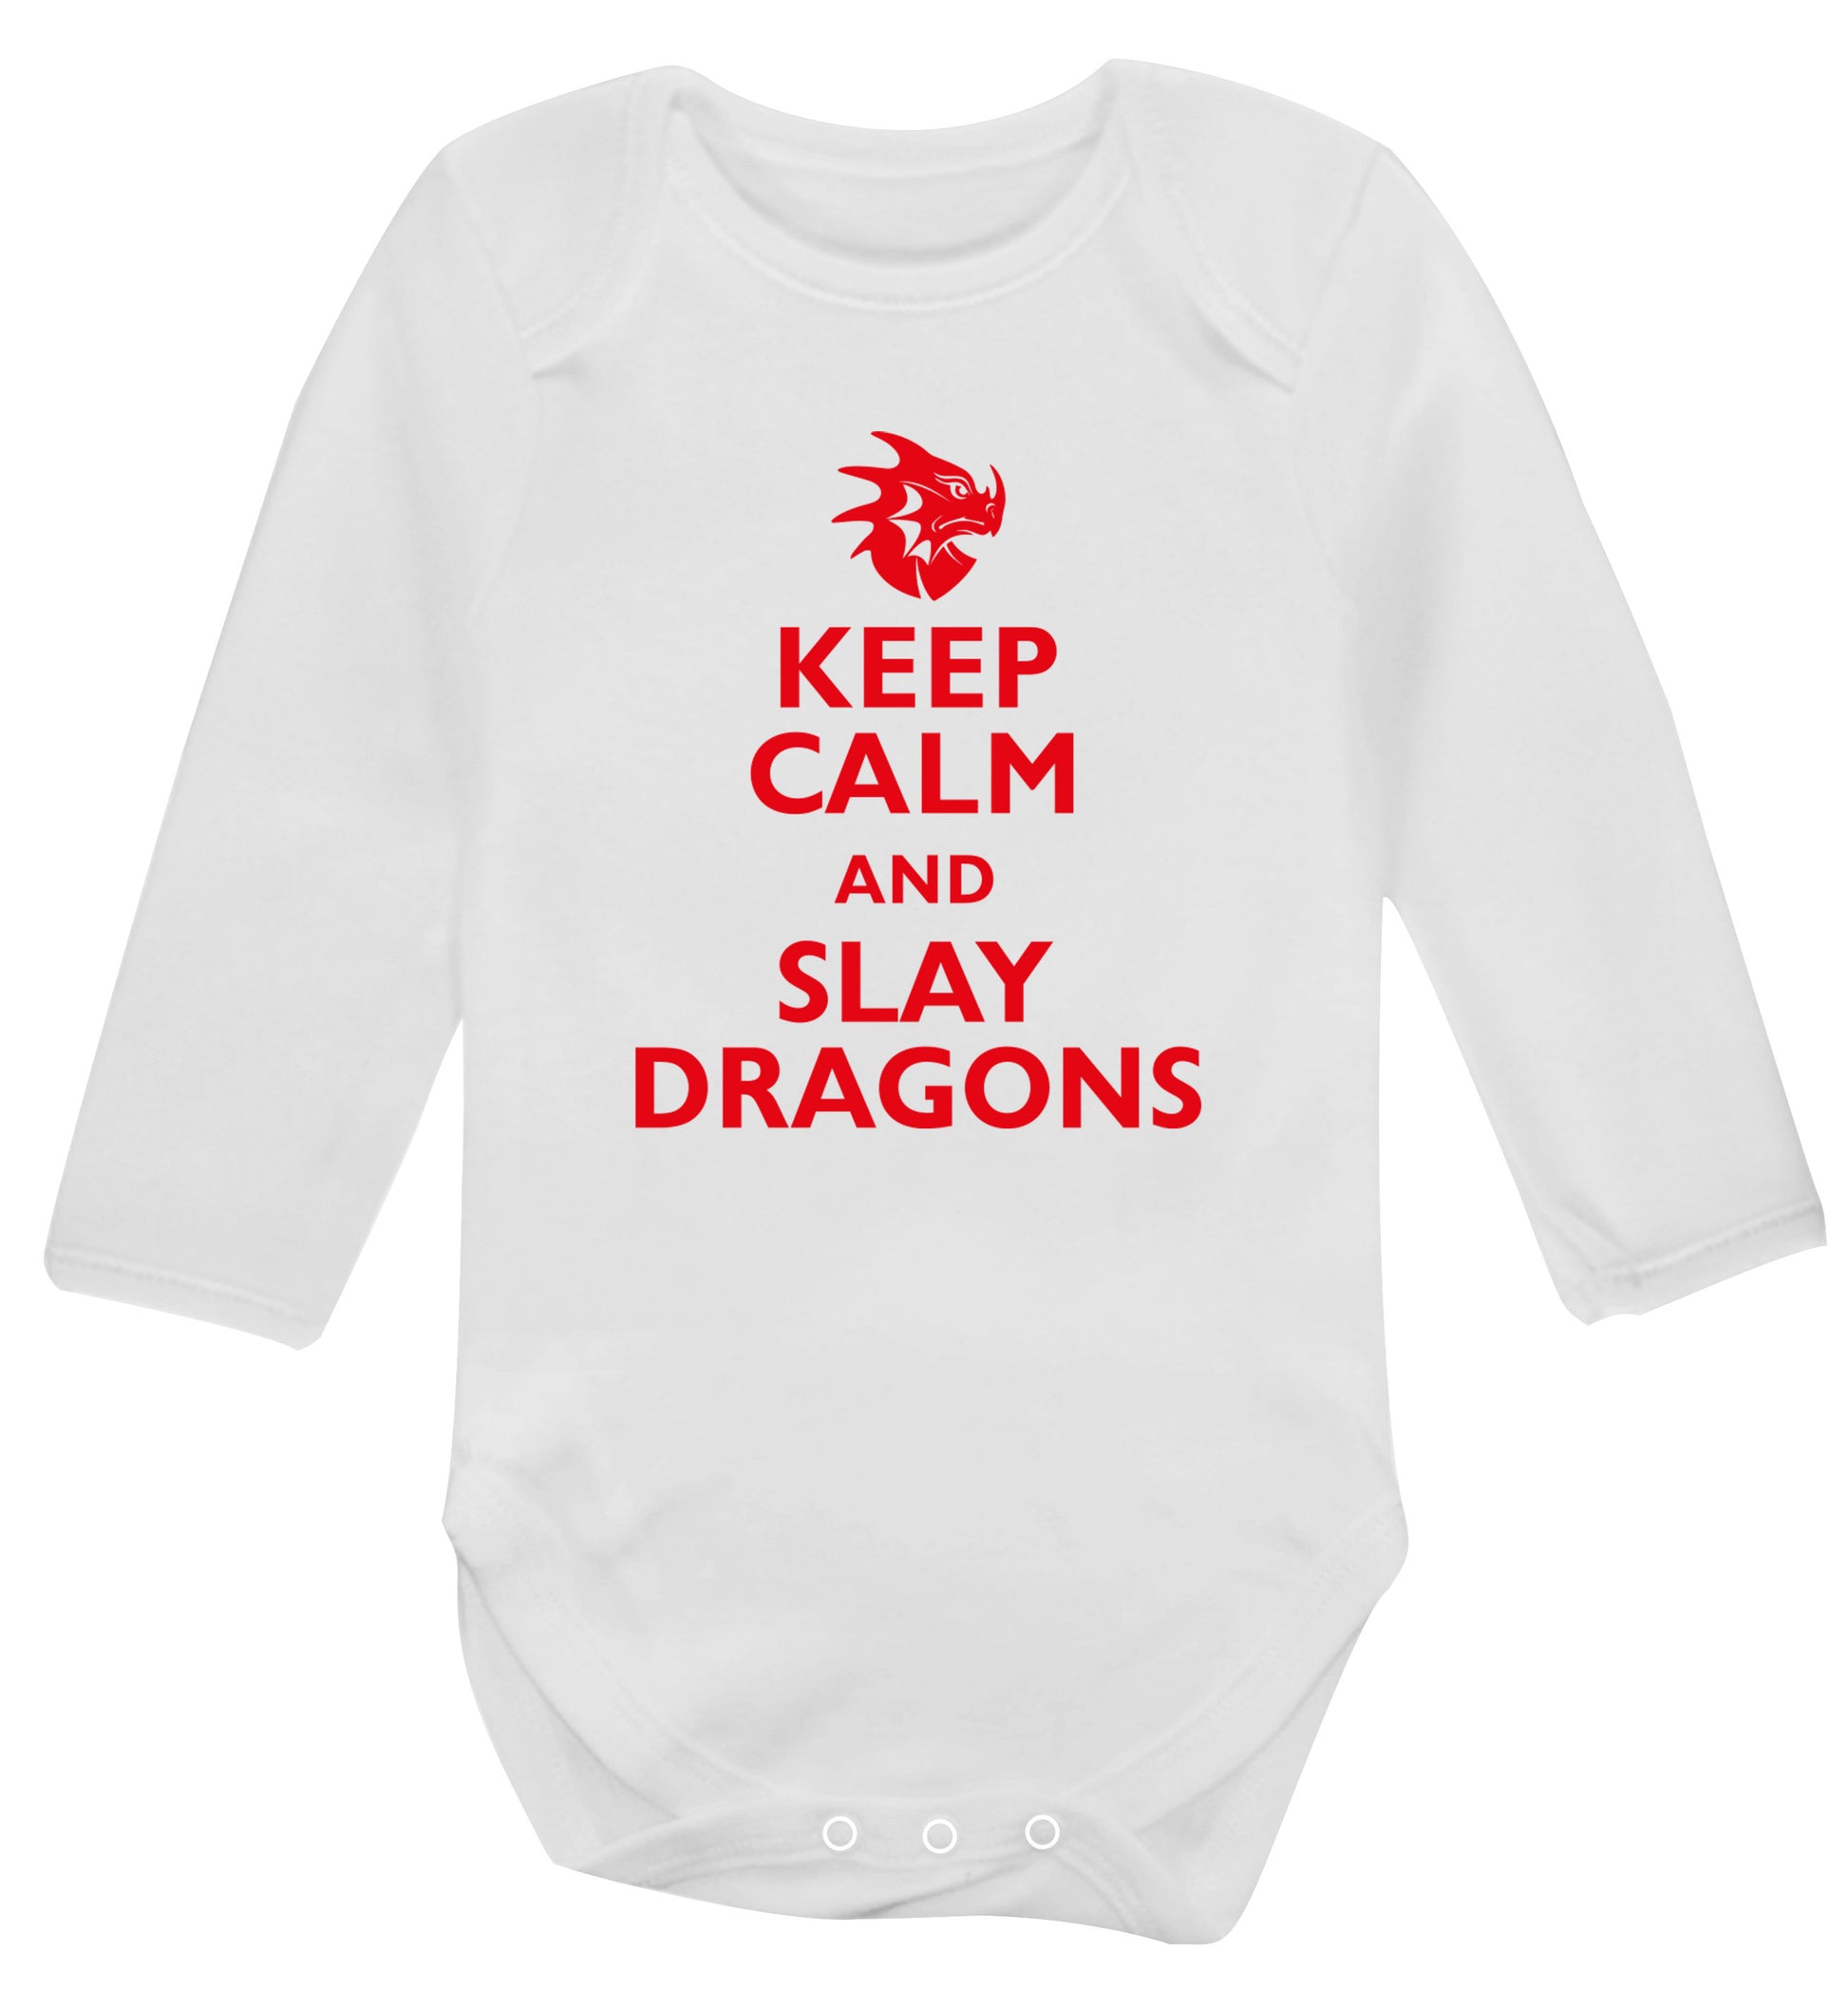 Keep calm and slay dragons Baby Vest long sleeved white 6-12 months